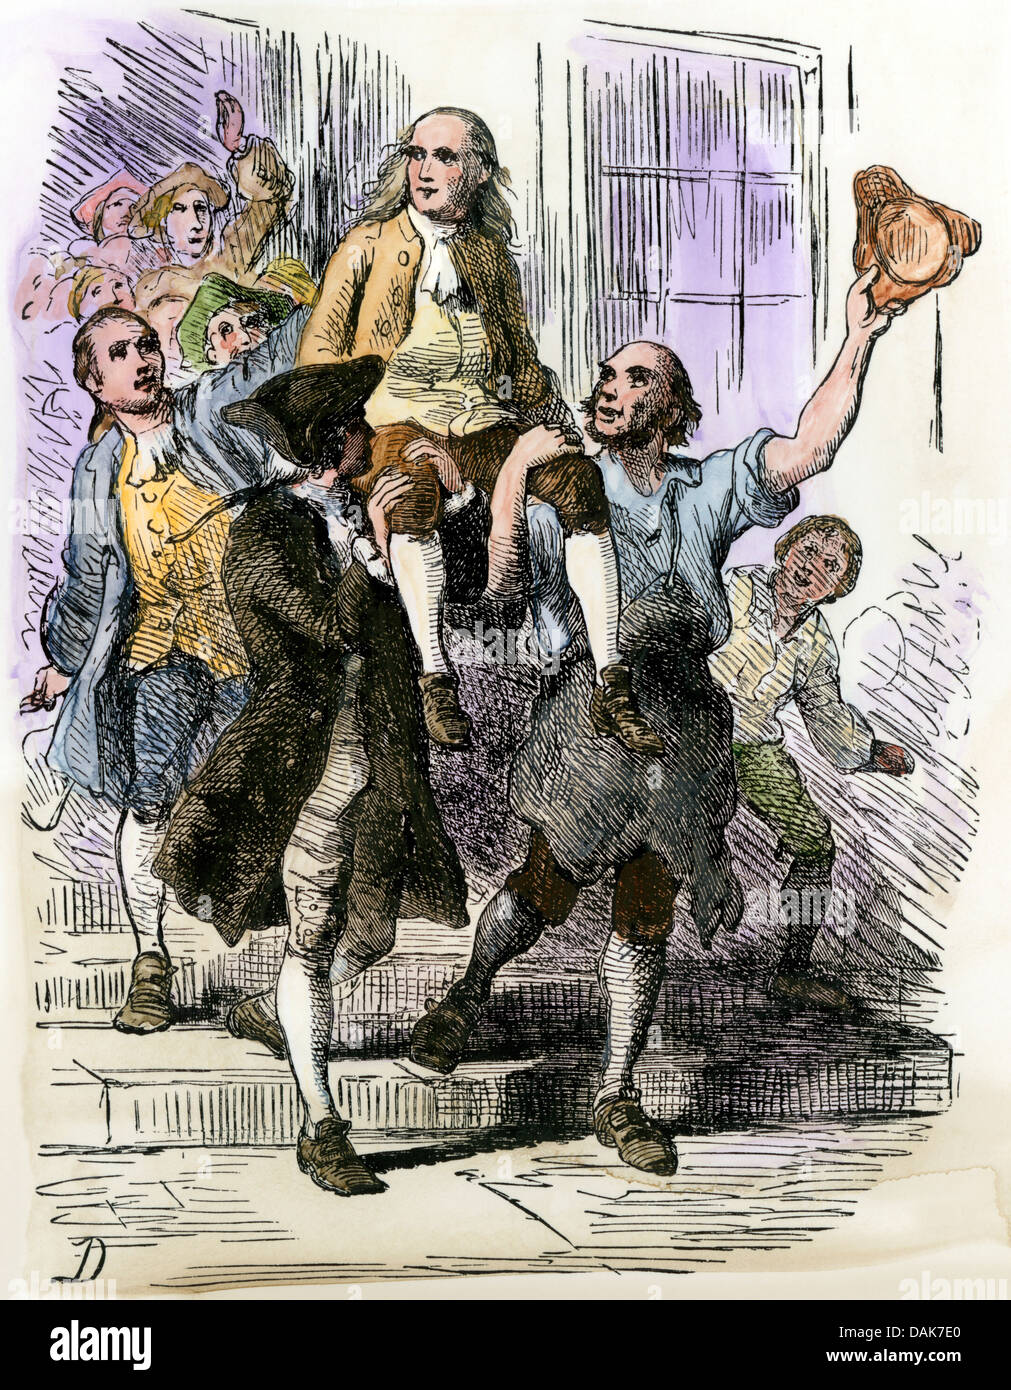 John Peter Zenger celebrating his acquittal after trial for libel, colonial New York City, 1735. Hand-colored woodcut of a Darley illustration Stock Photo